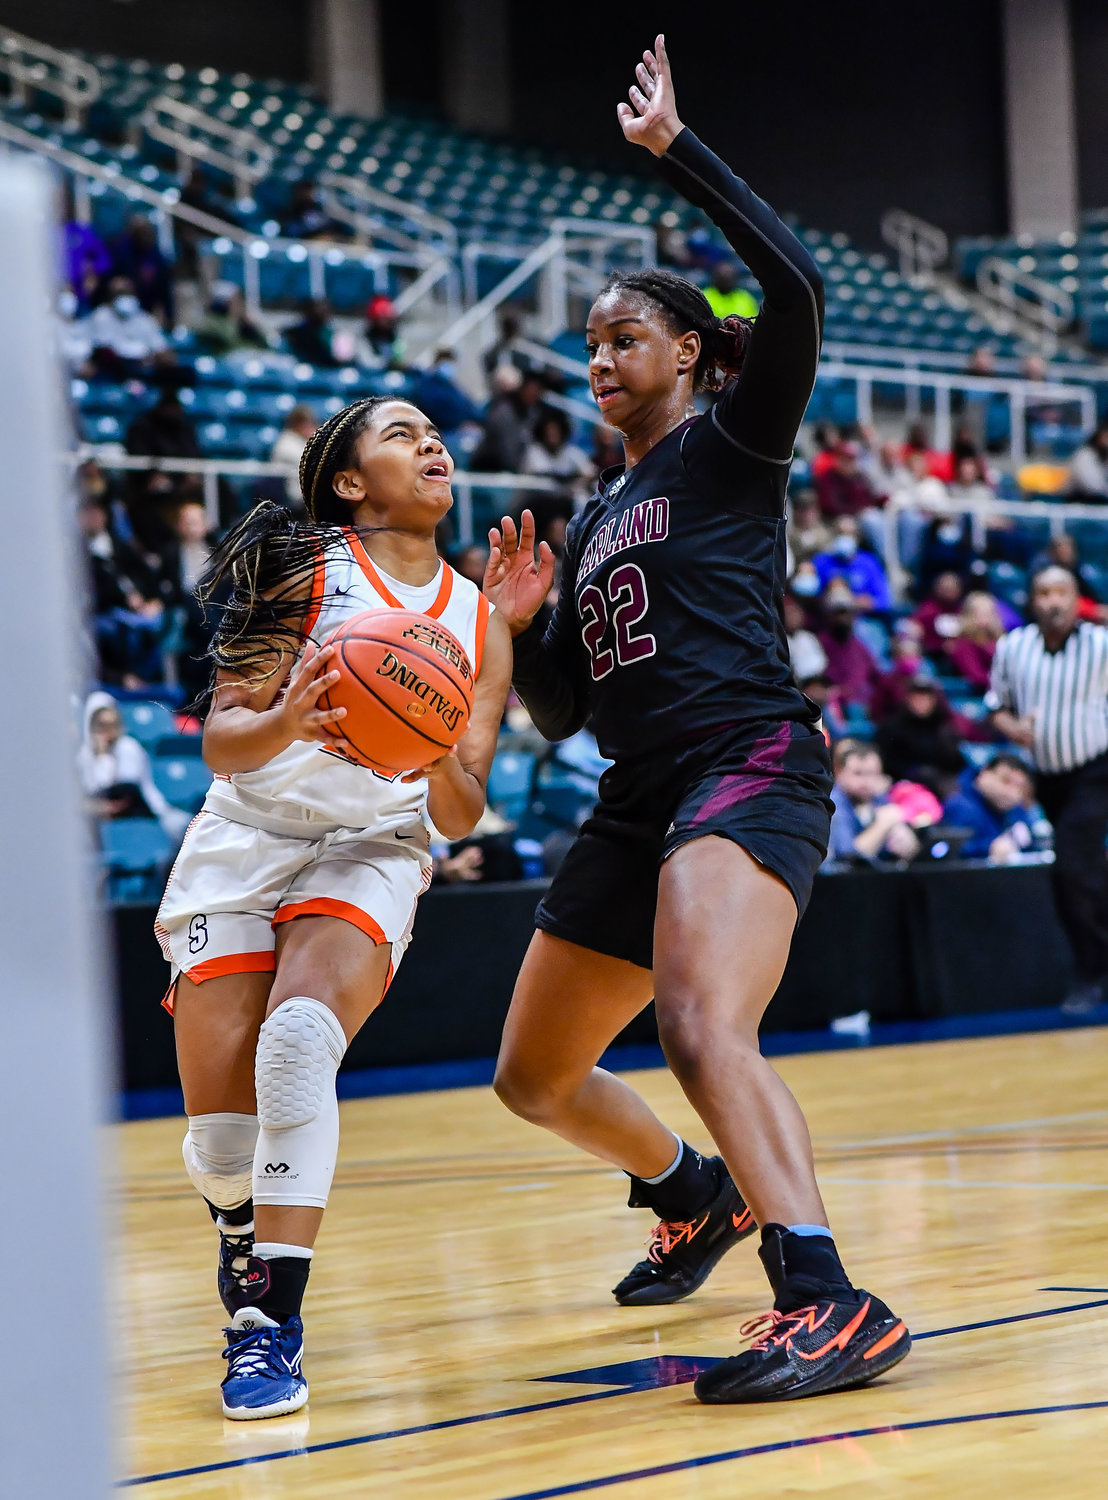 Katy Tx. Feb 25, 2022:  Seven Lakes Lenore Hudspeth #23 drives to the basket during the Regional SemiFinal playoff game, Seven Lakes vs Pearland at the Merrell Center. (Photo by Mark Goodman / Katy Times)